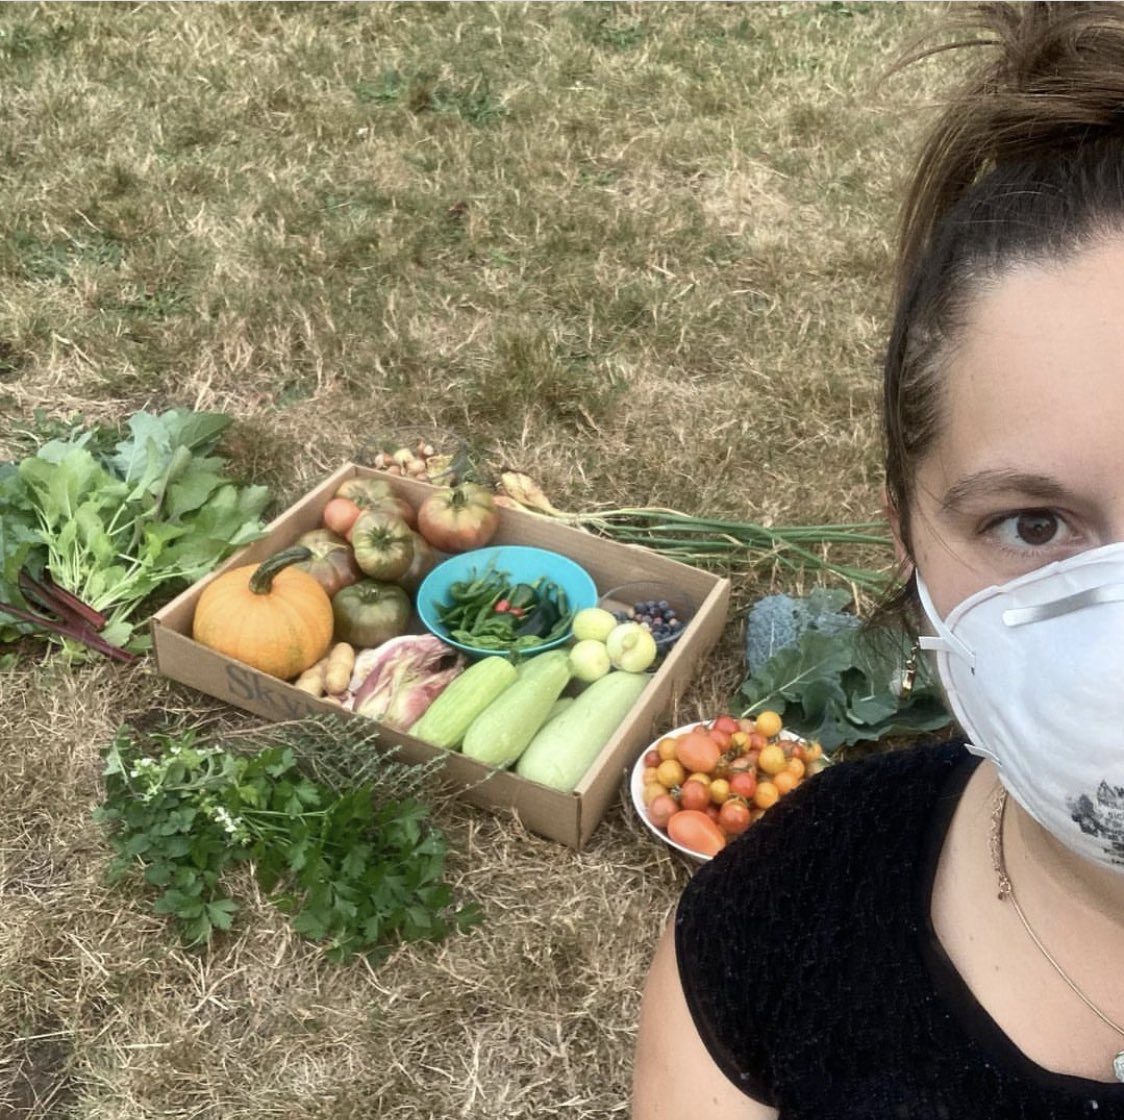 Throwback to masked garden harvests thanks to wildfire smoke 😷